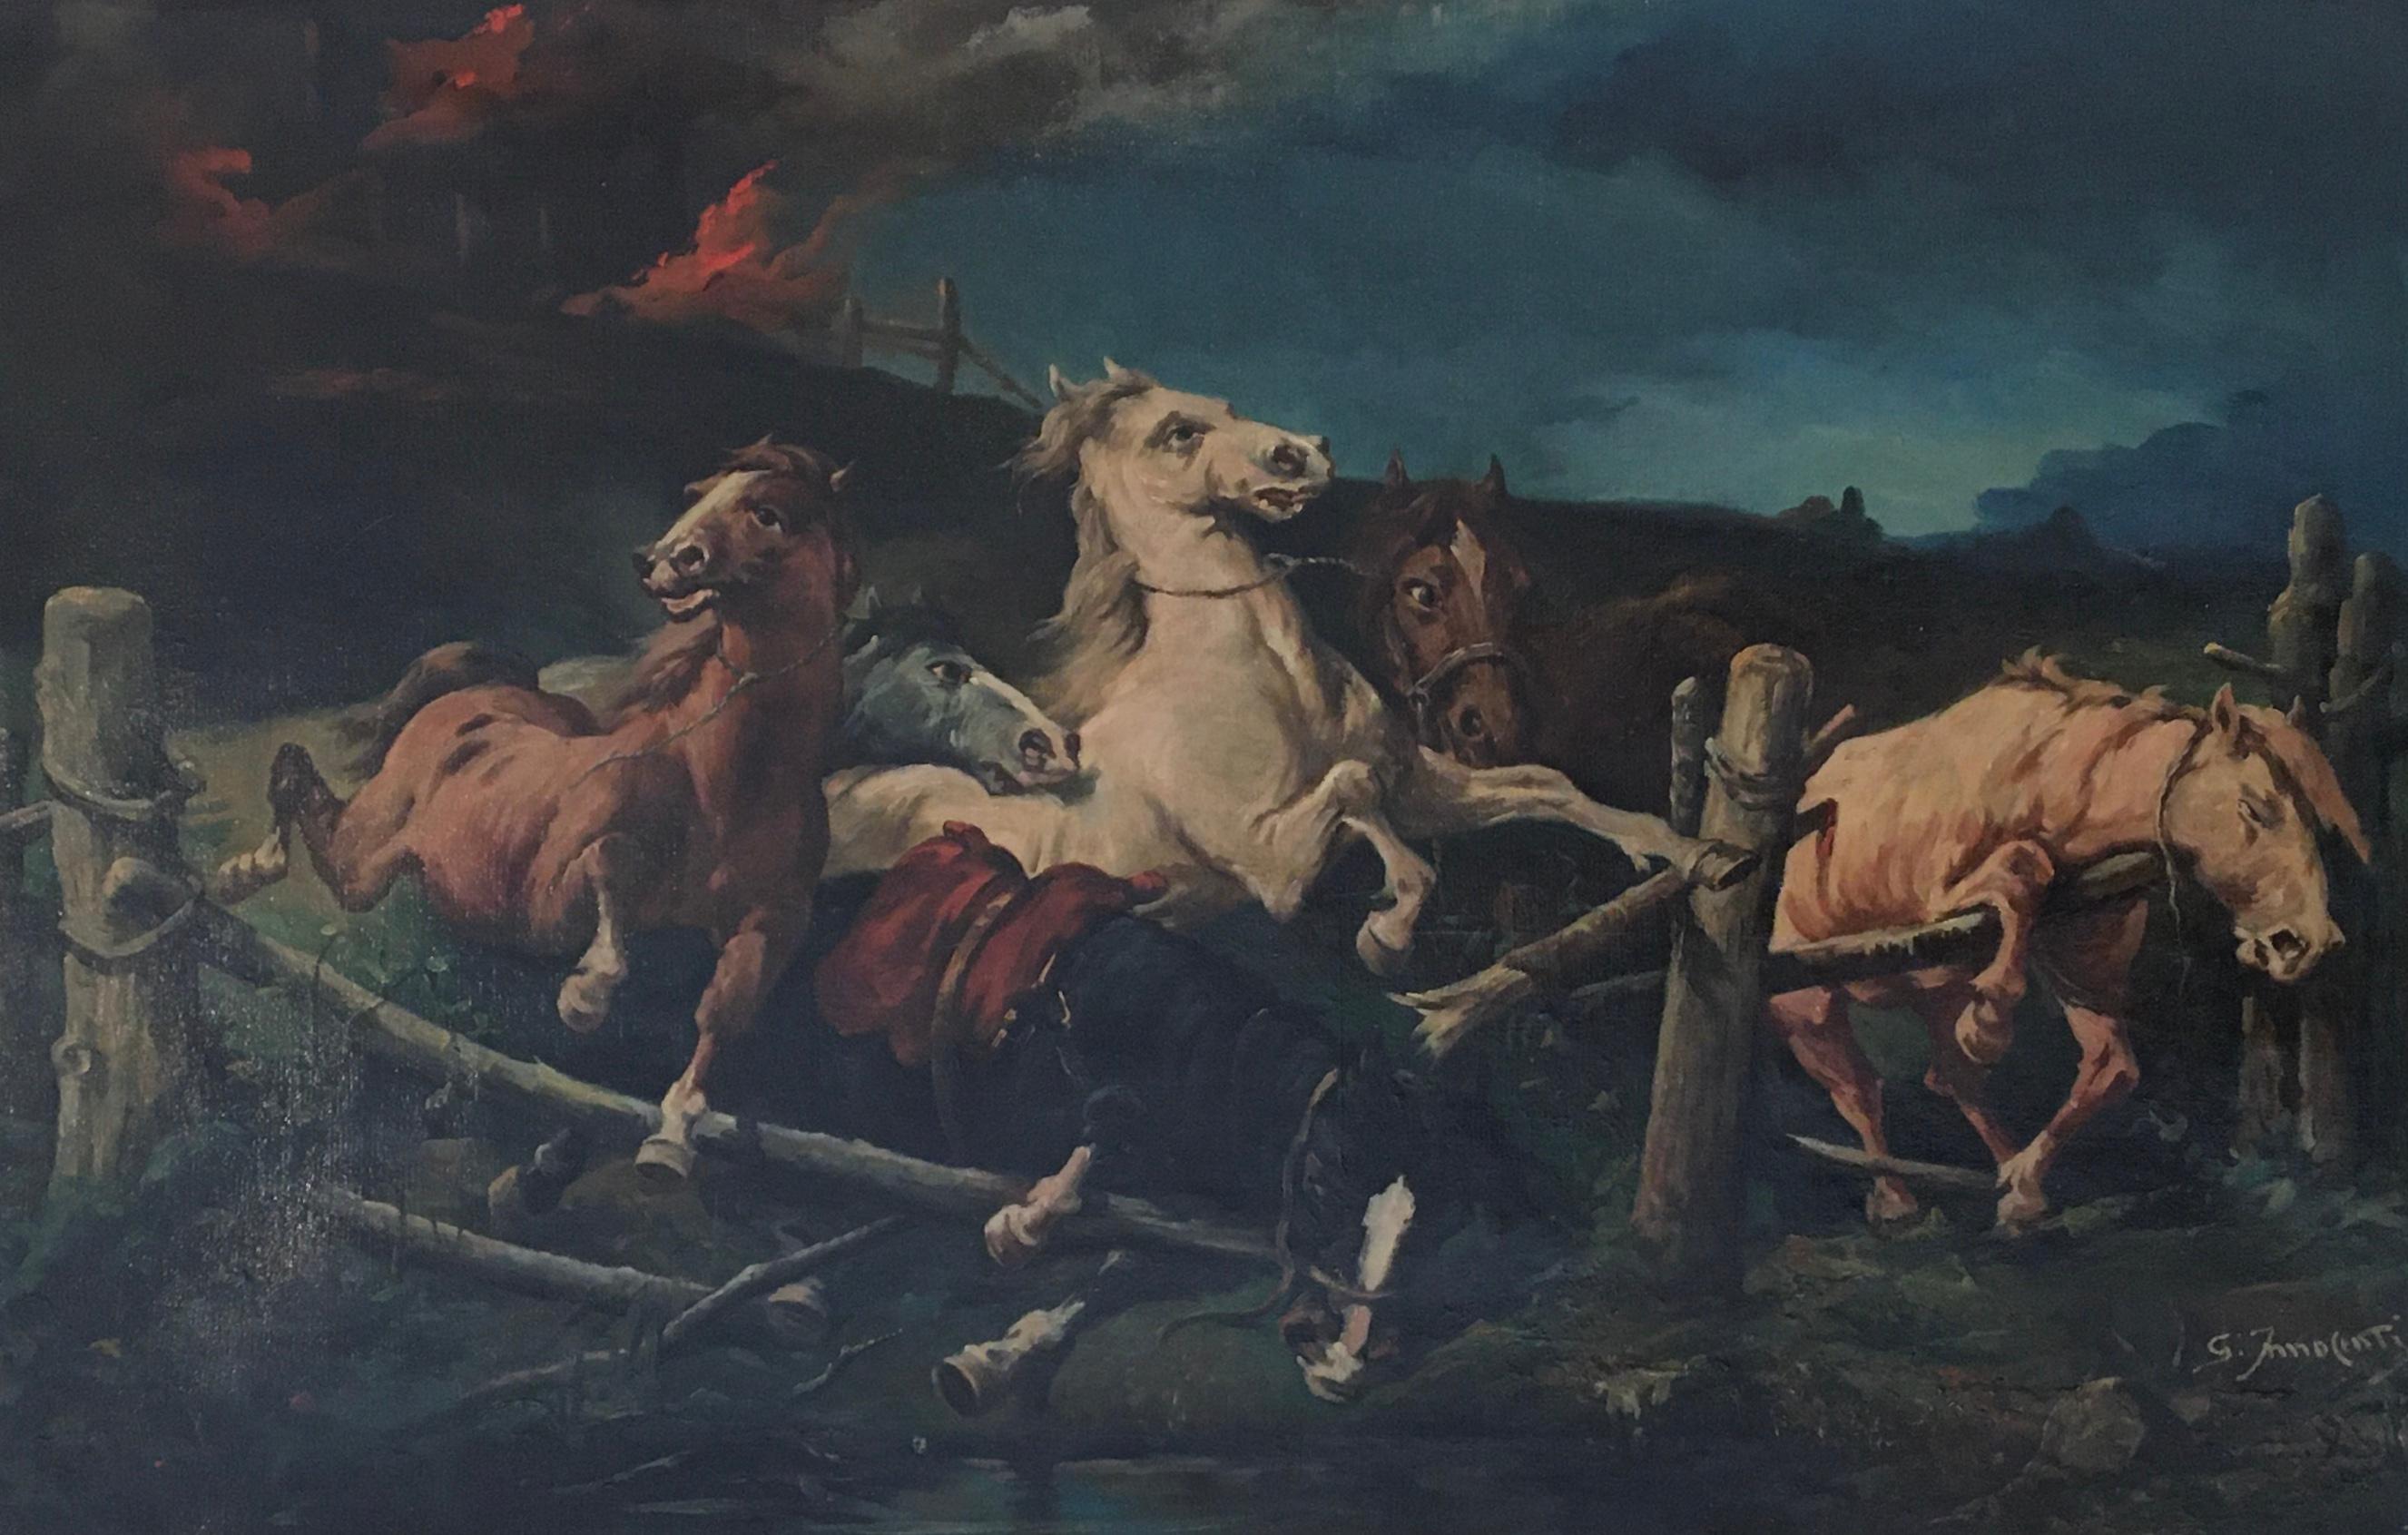 Horses panicked by fire